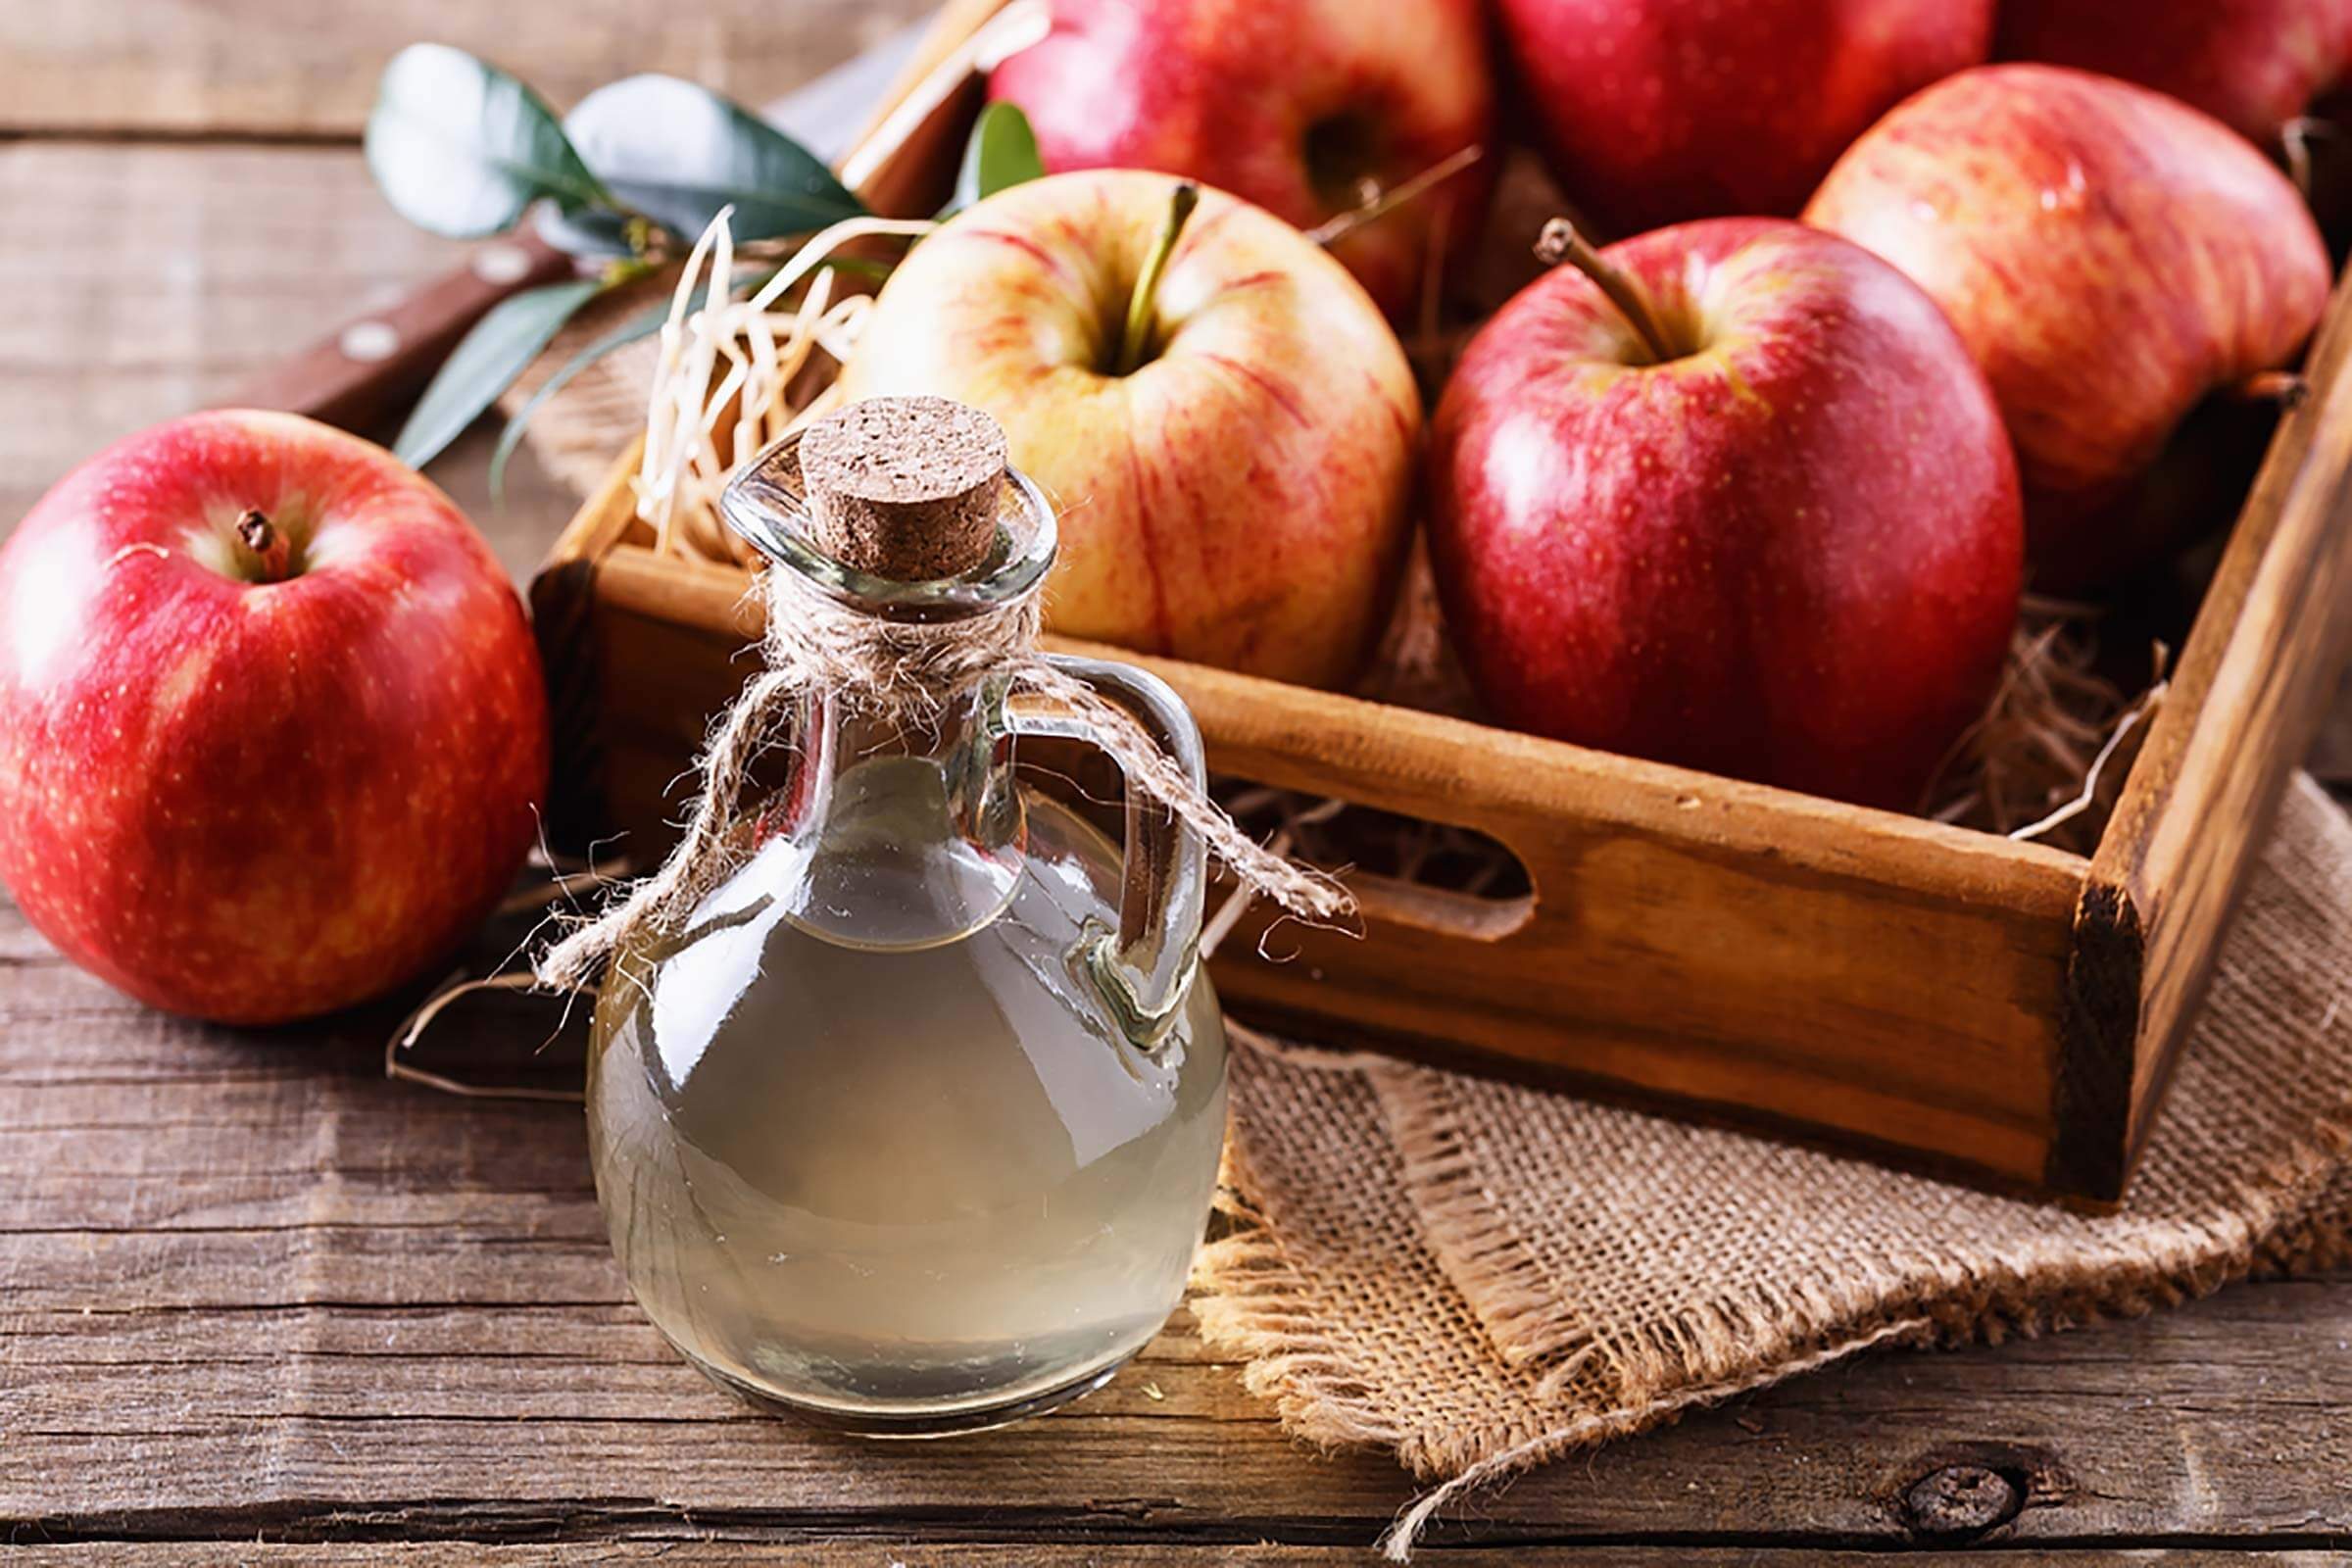 Apple Cider Vinegar Weight Loss Works Why It Works The Healthy pic